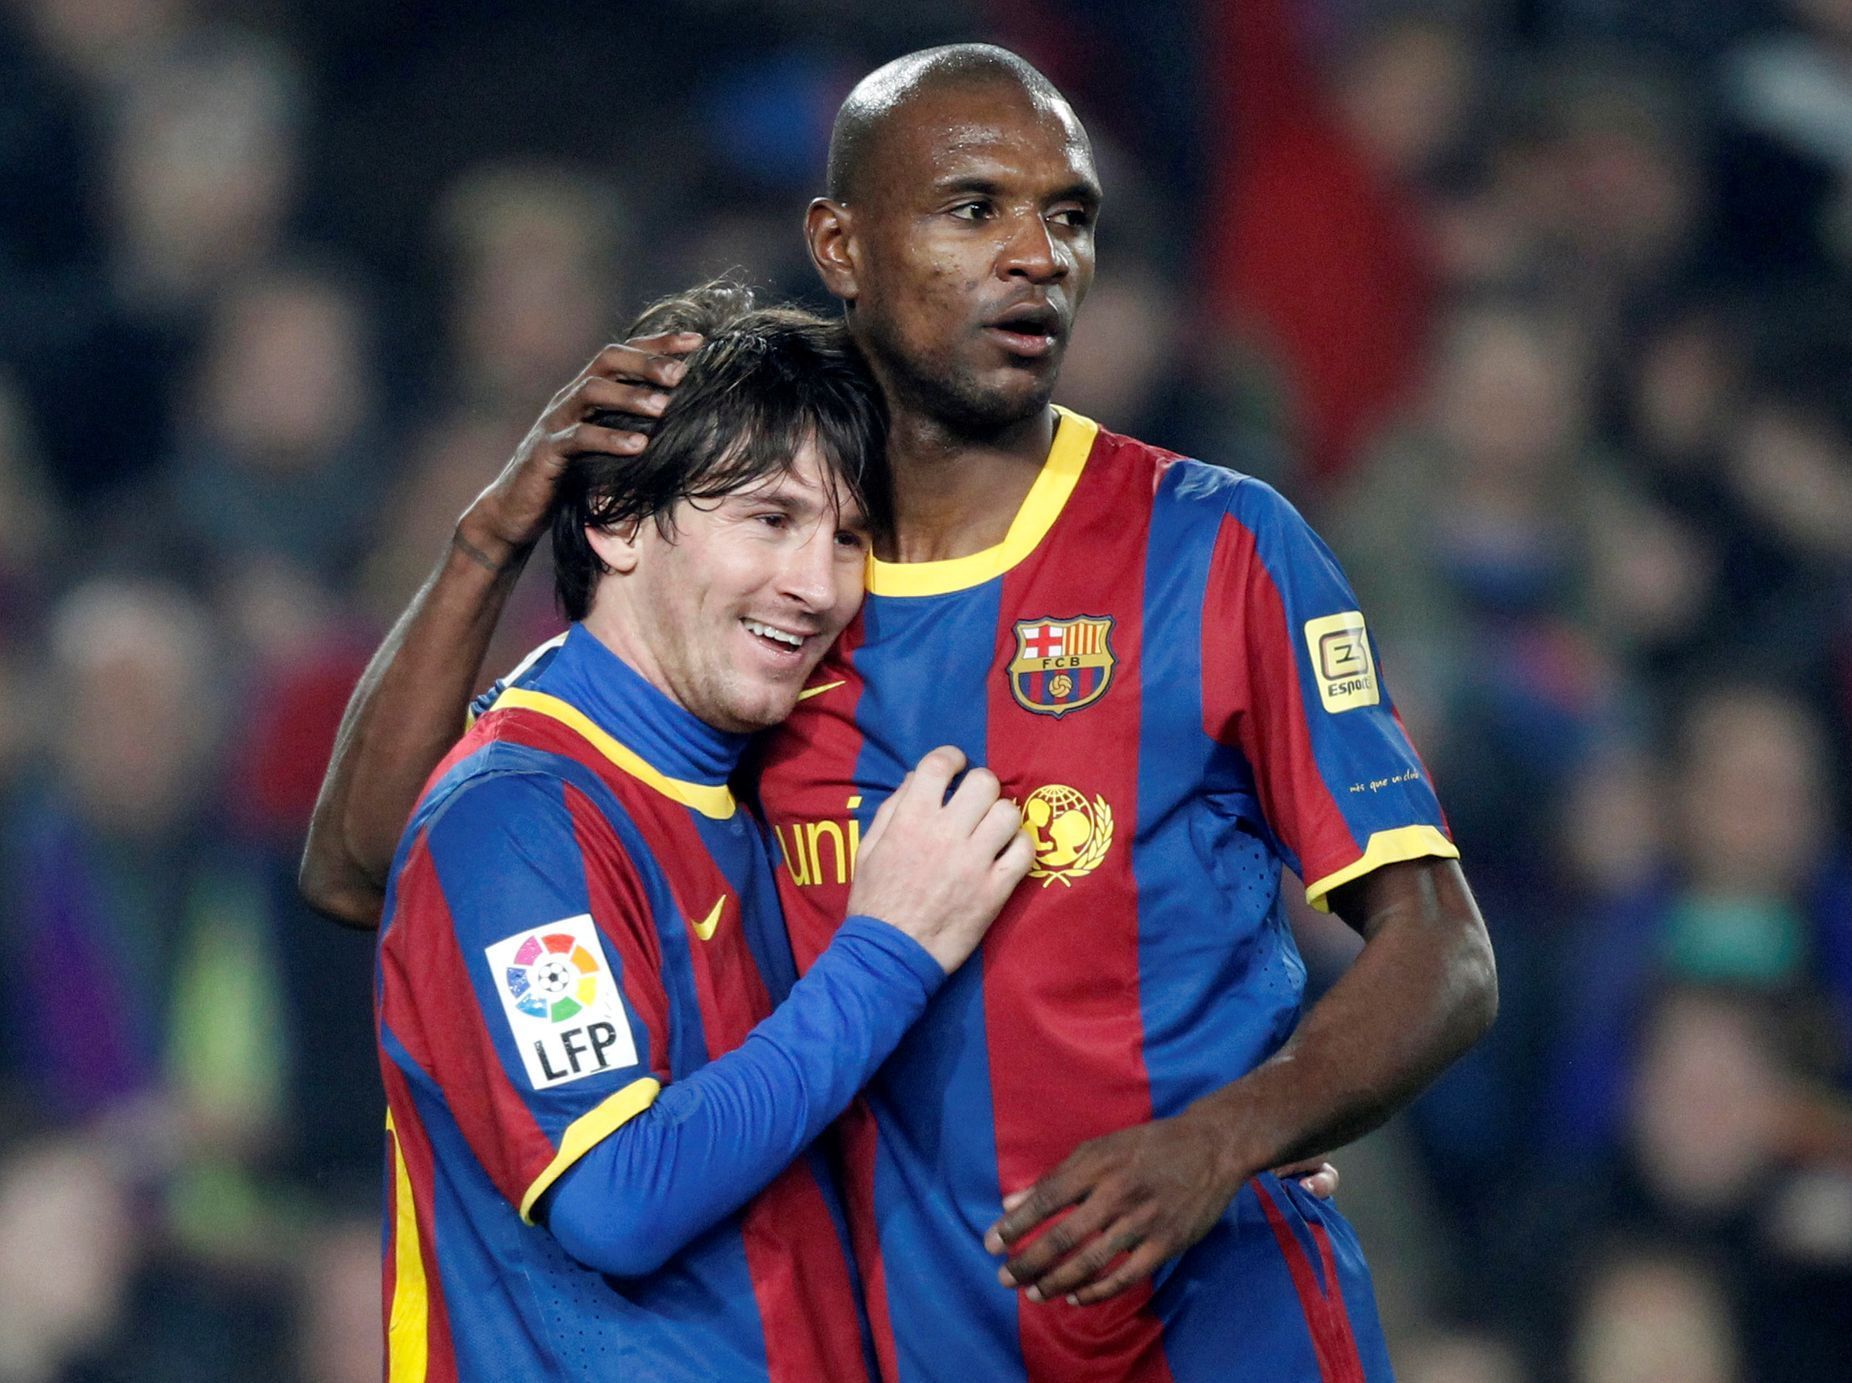 FILE PHOTO: Barcelona defender Abidal embraces teammate Messi after a goal against Atletico Madrid during their Spanish first division soccer match in Barcelona